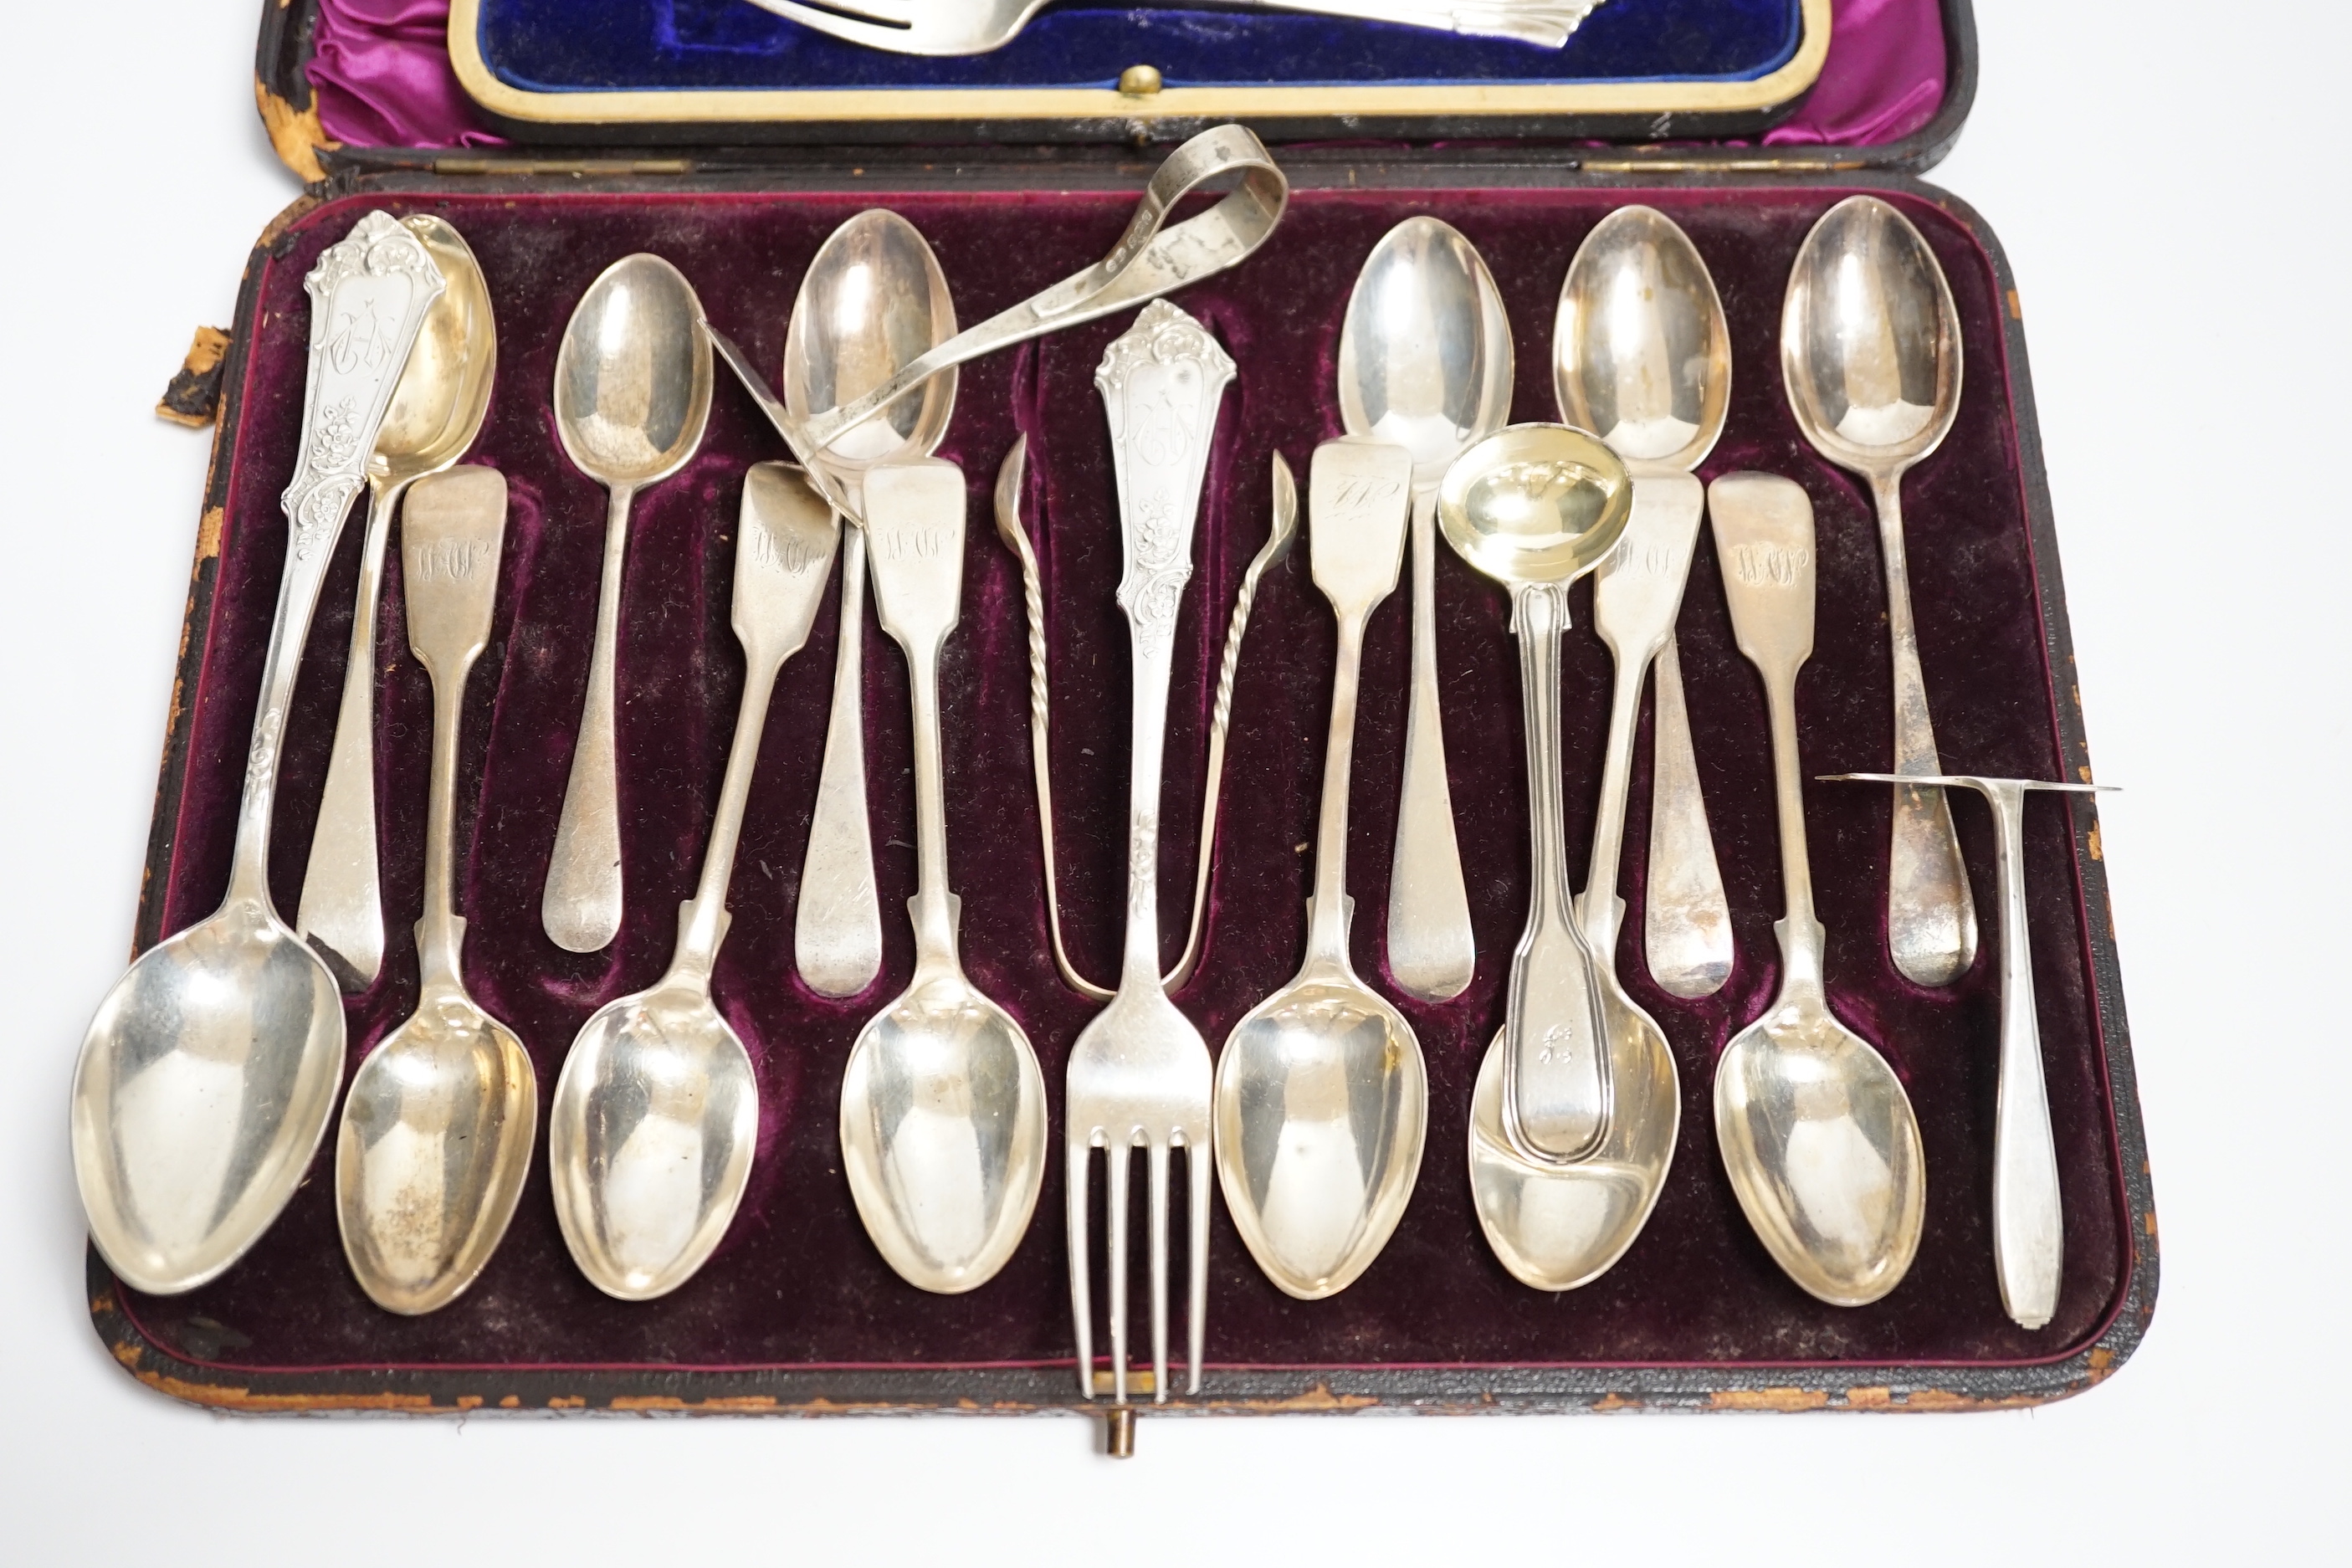 Two sets of six silver teaspoons, fiddle and Old English pattern and other silver or 900 flatware - Image 2 of 5